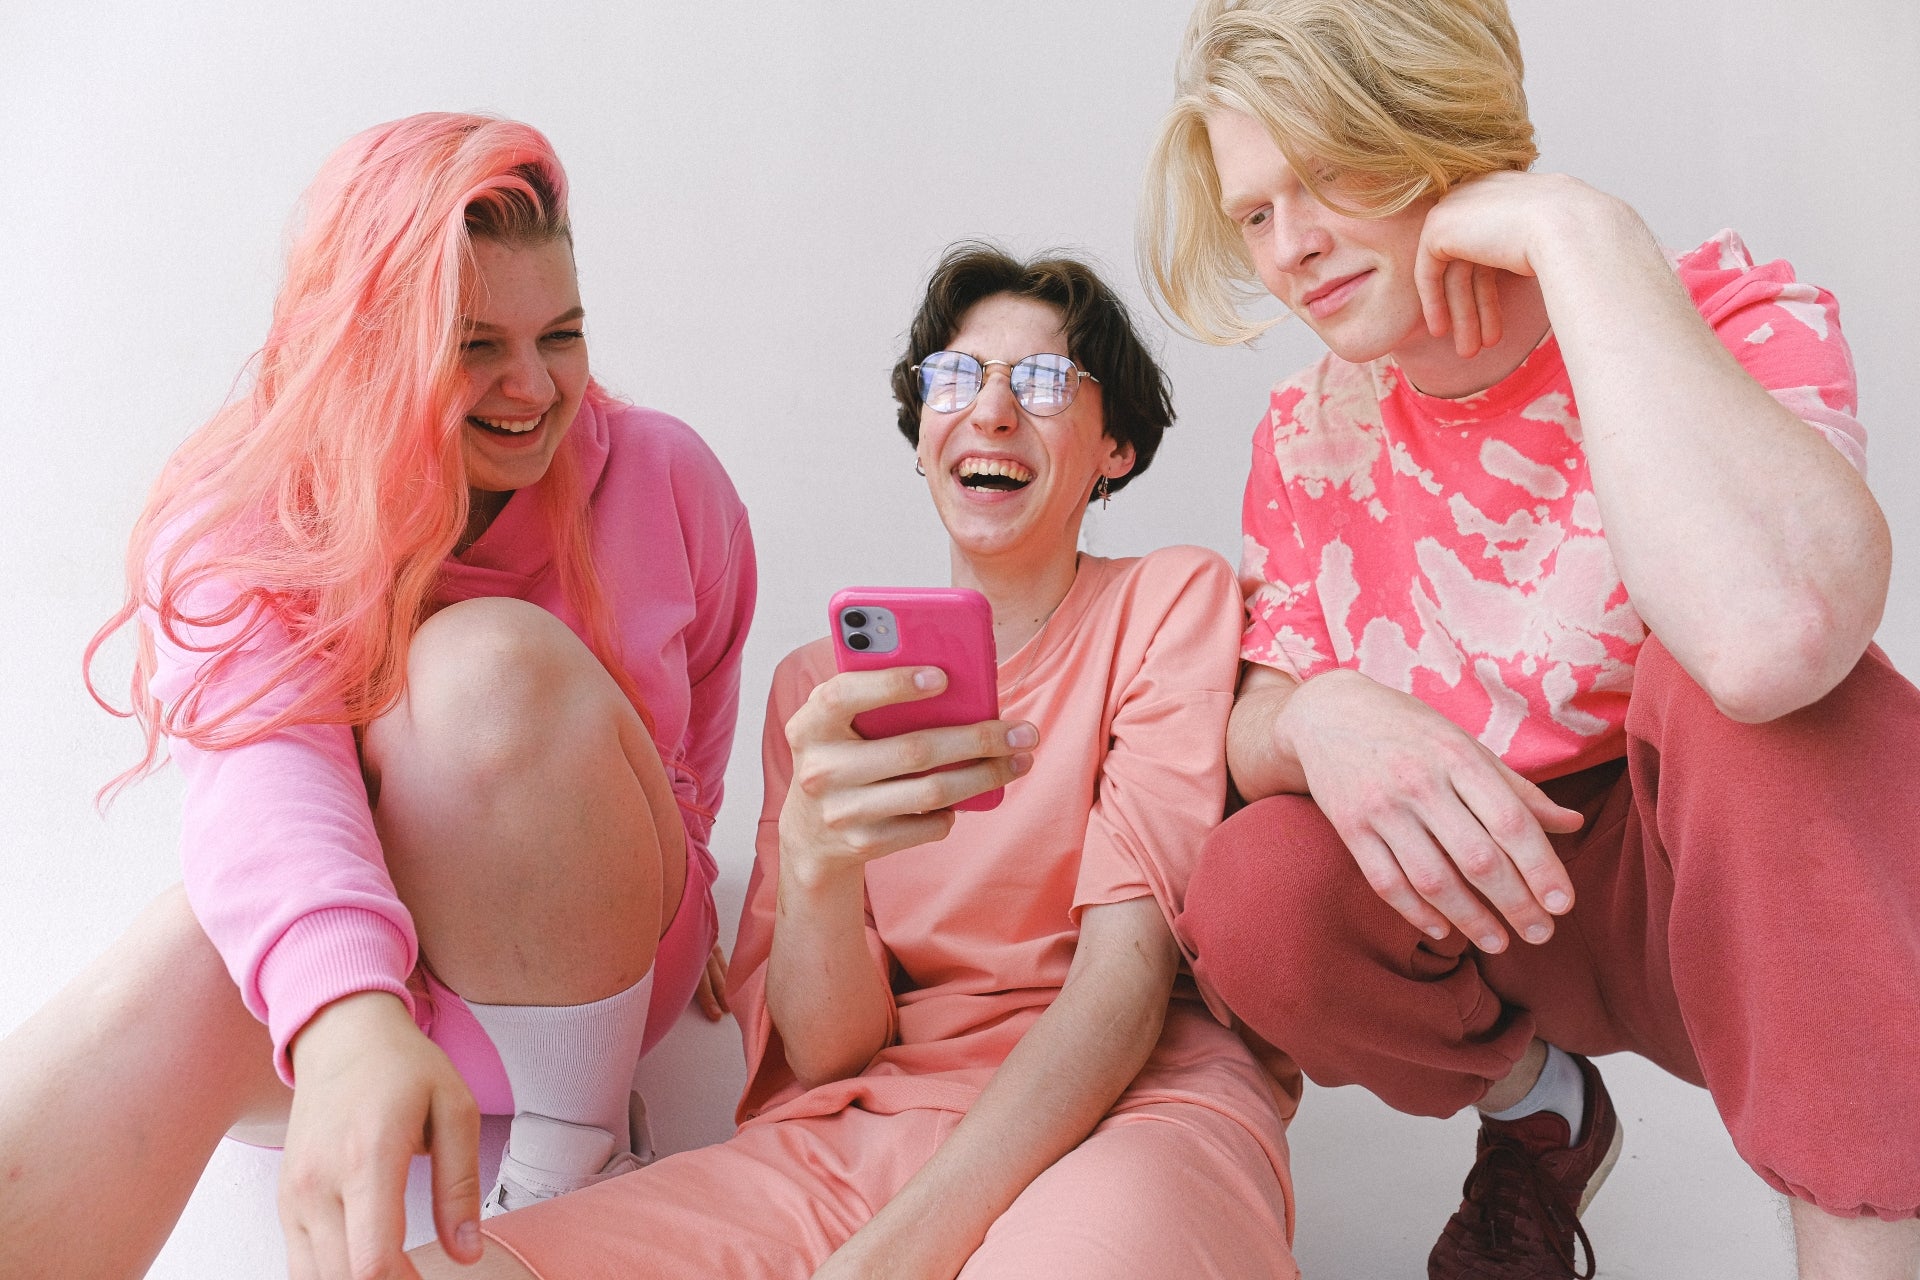 Three young people wearing pink laugh and look at a cell phone